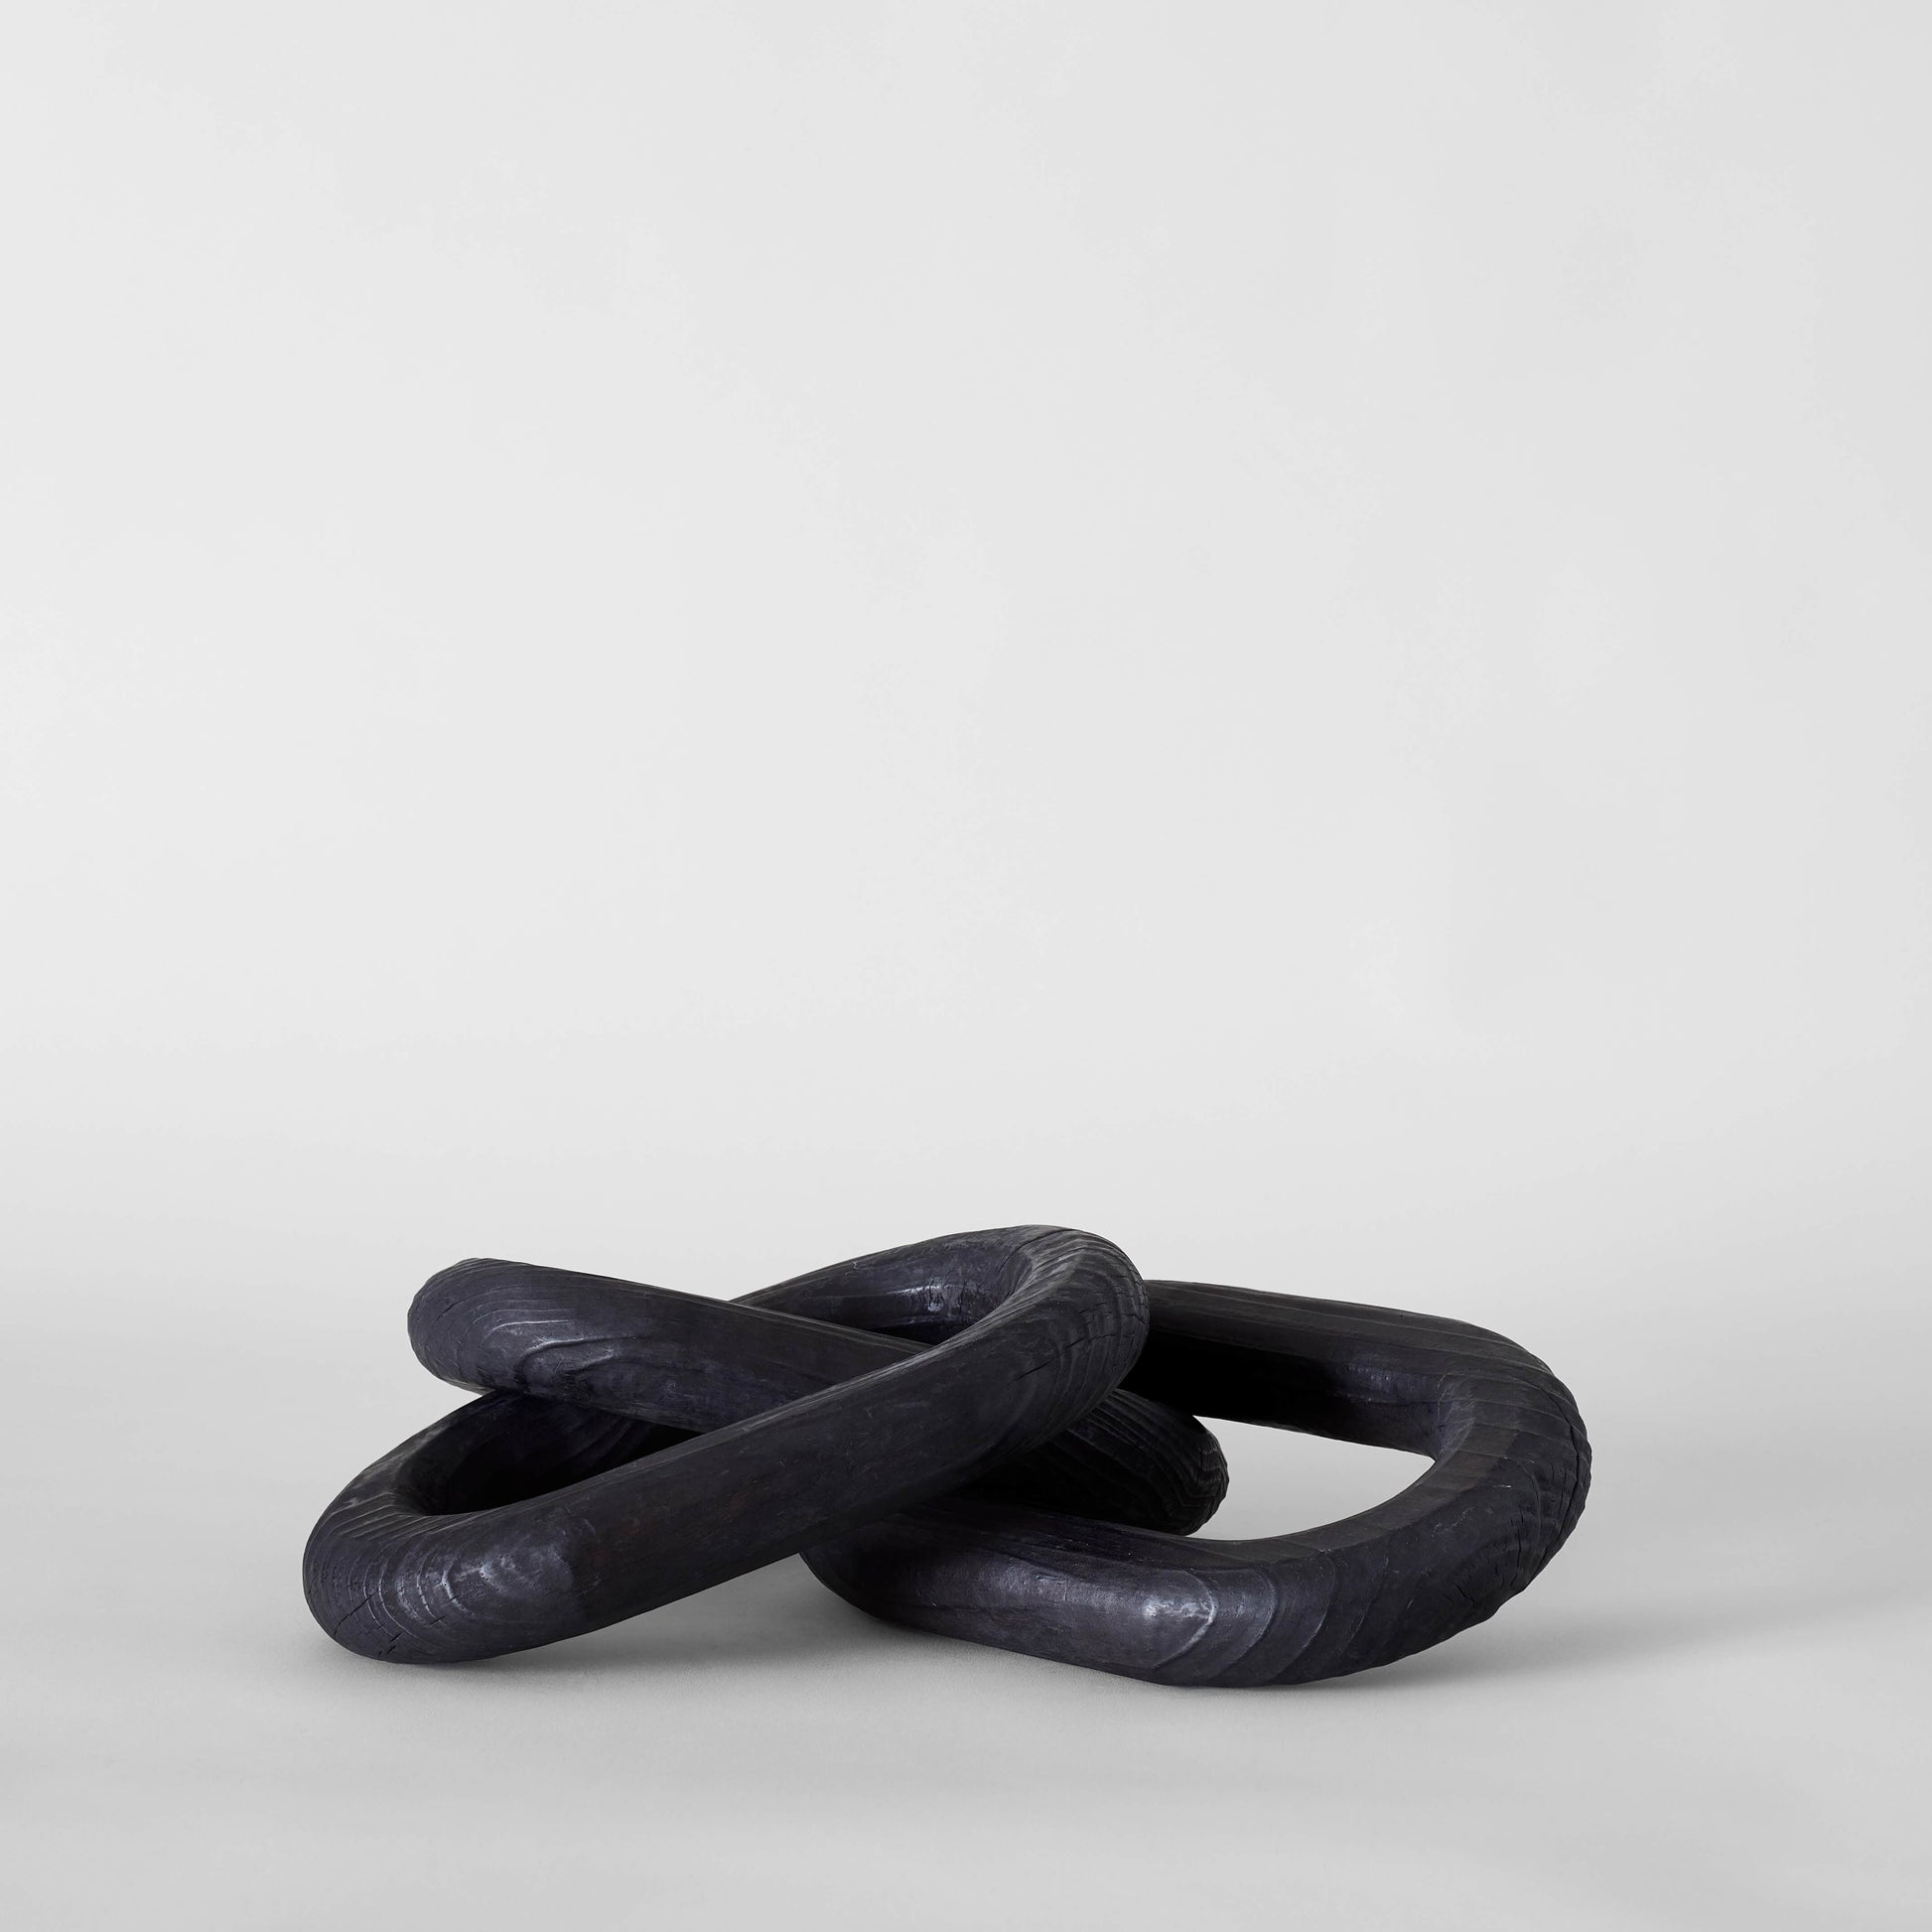 Bloomist Objets Charcoal Wood Chain, Large Link